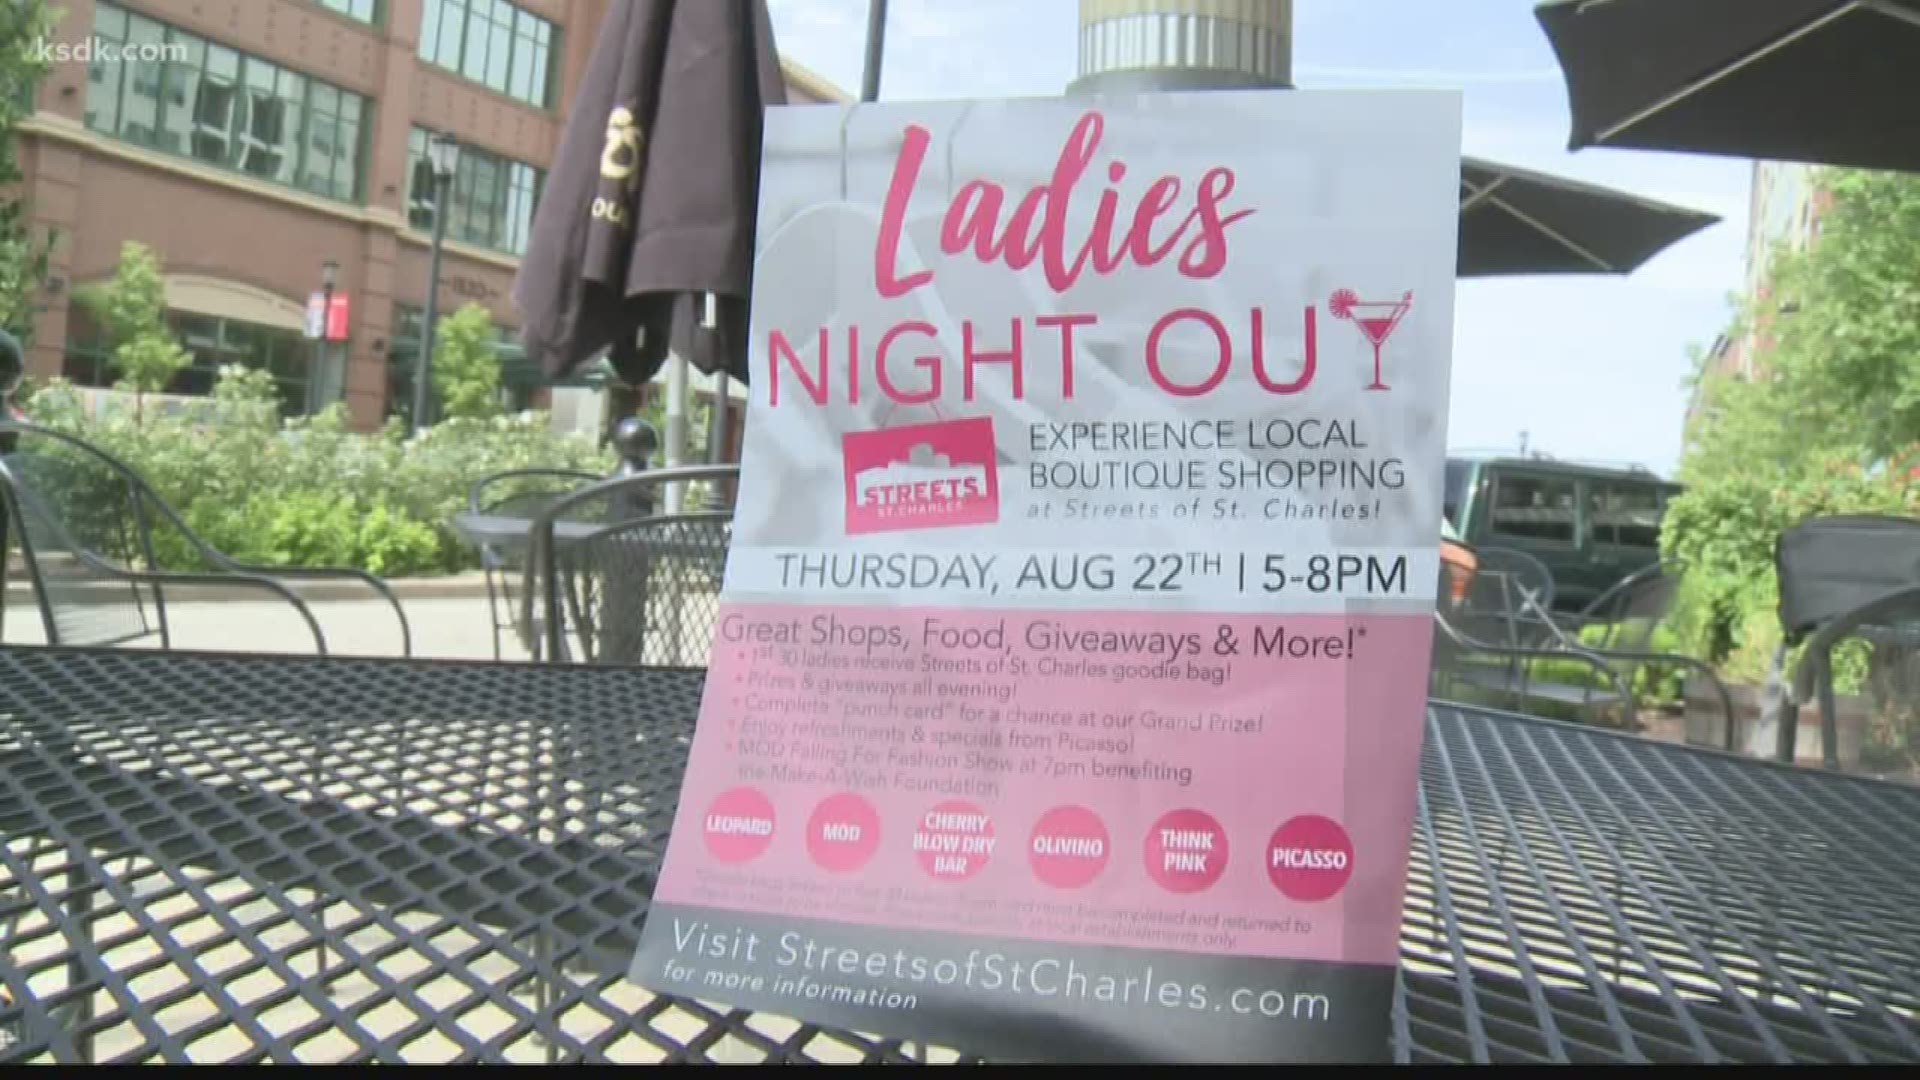 The Streets of St. Charles will host Ladies Night Out tonight on August 22, 2019.